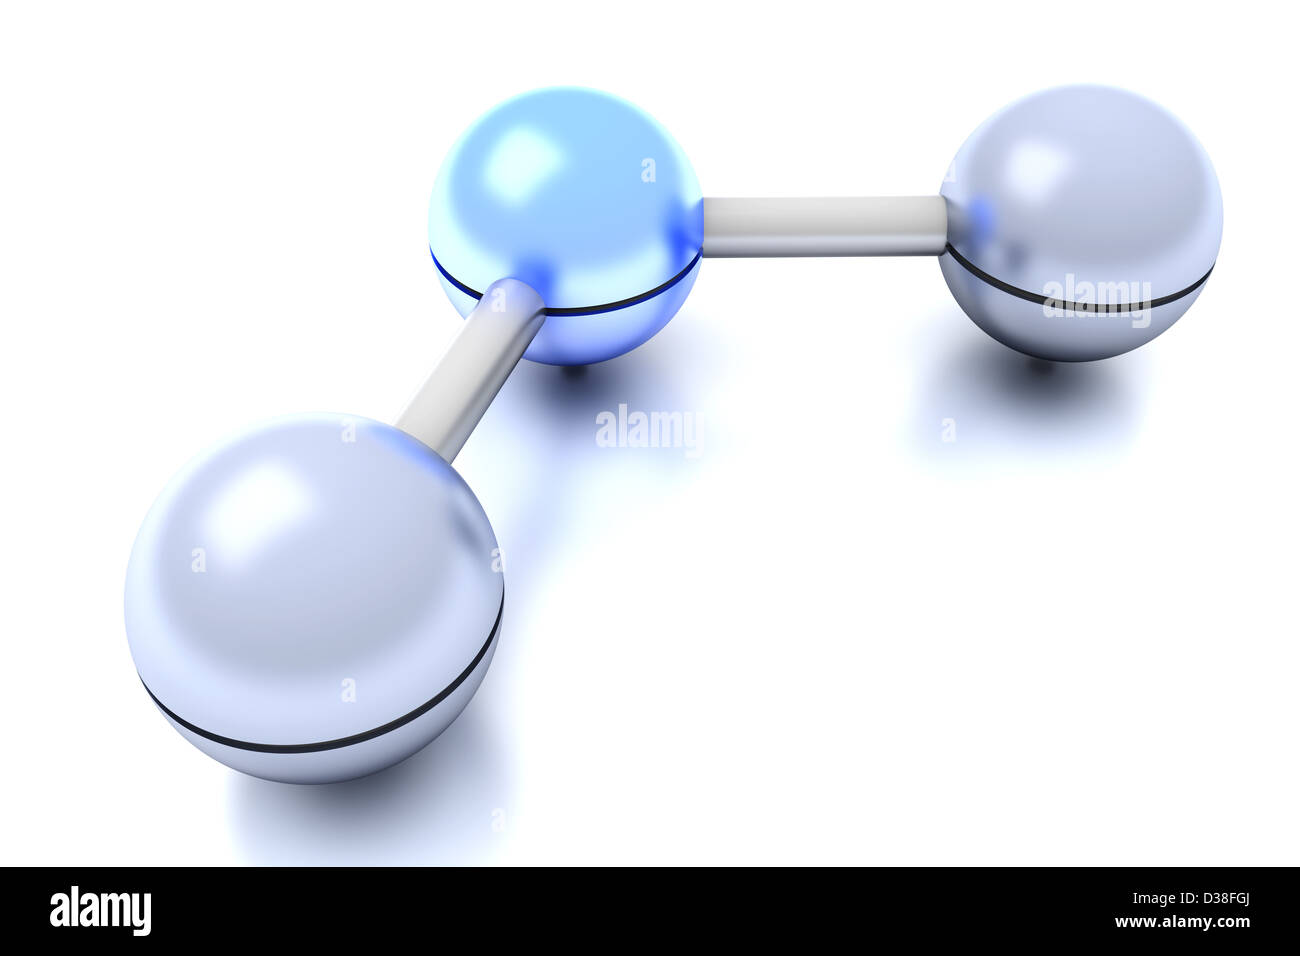 A H2O / Water Molecule. 3D rendered Illustration. Stock Photo